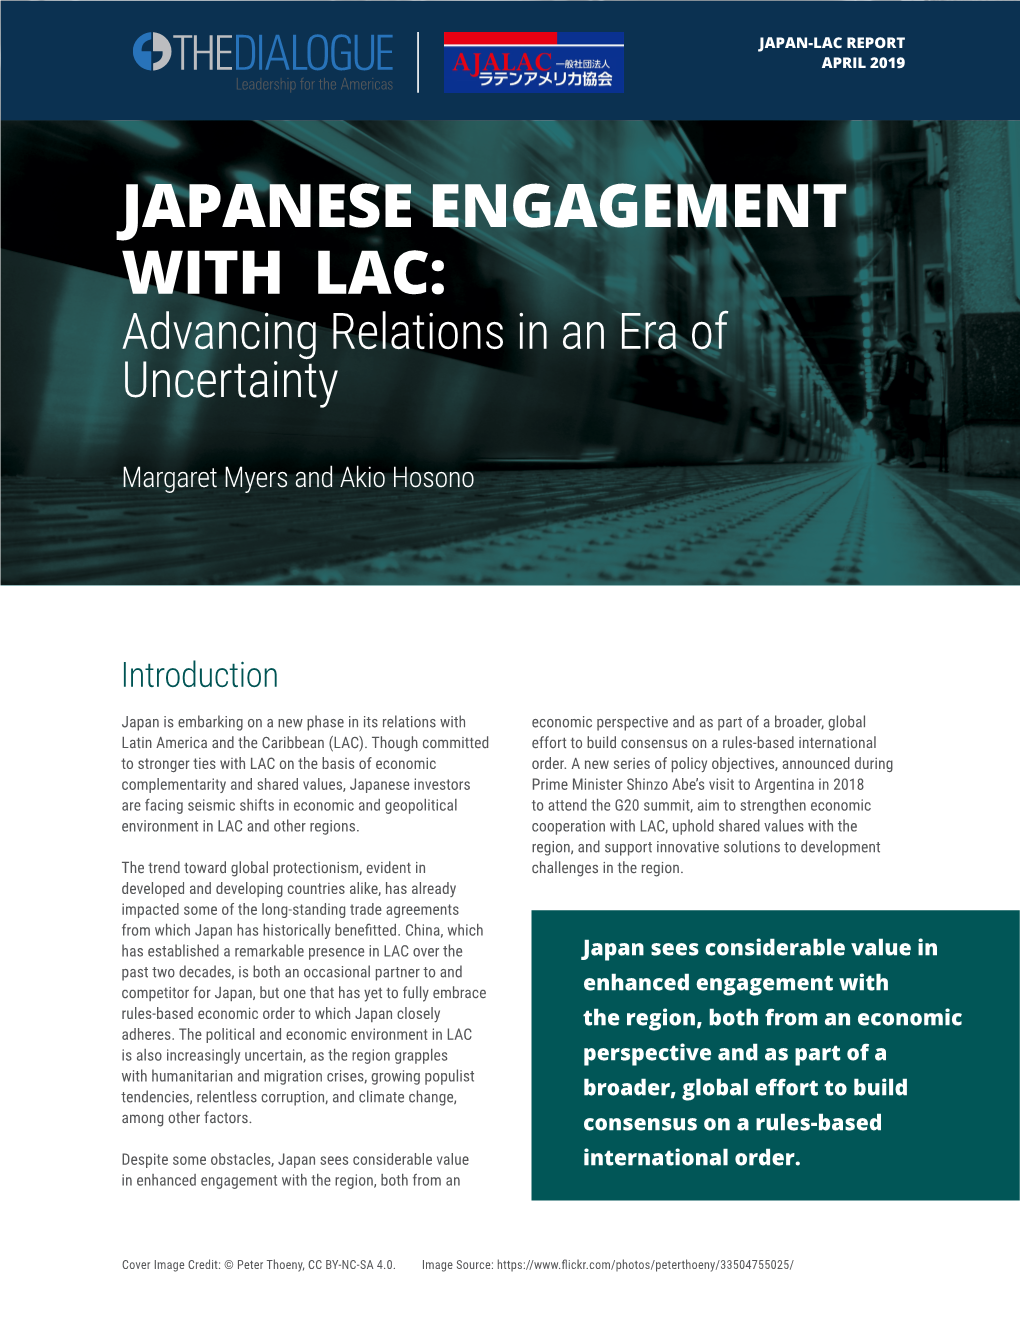 JAPANESE ENGAGEMENT with LAC: Advancing Relations in an Era of Uncertainty